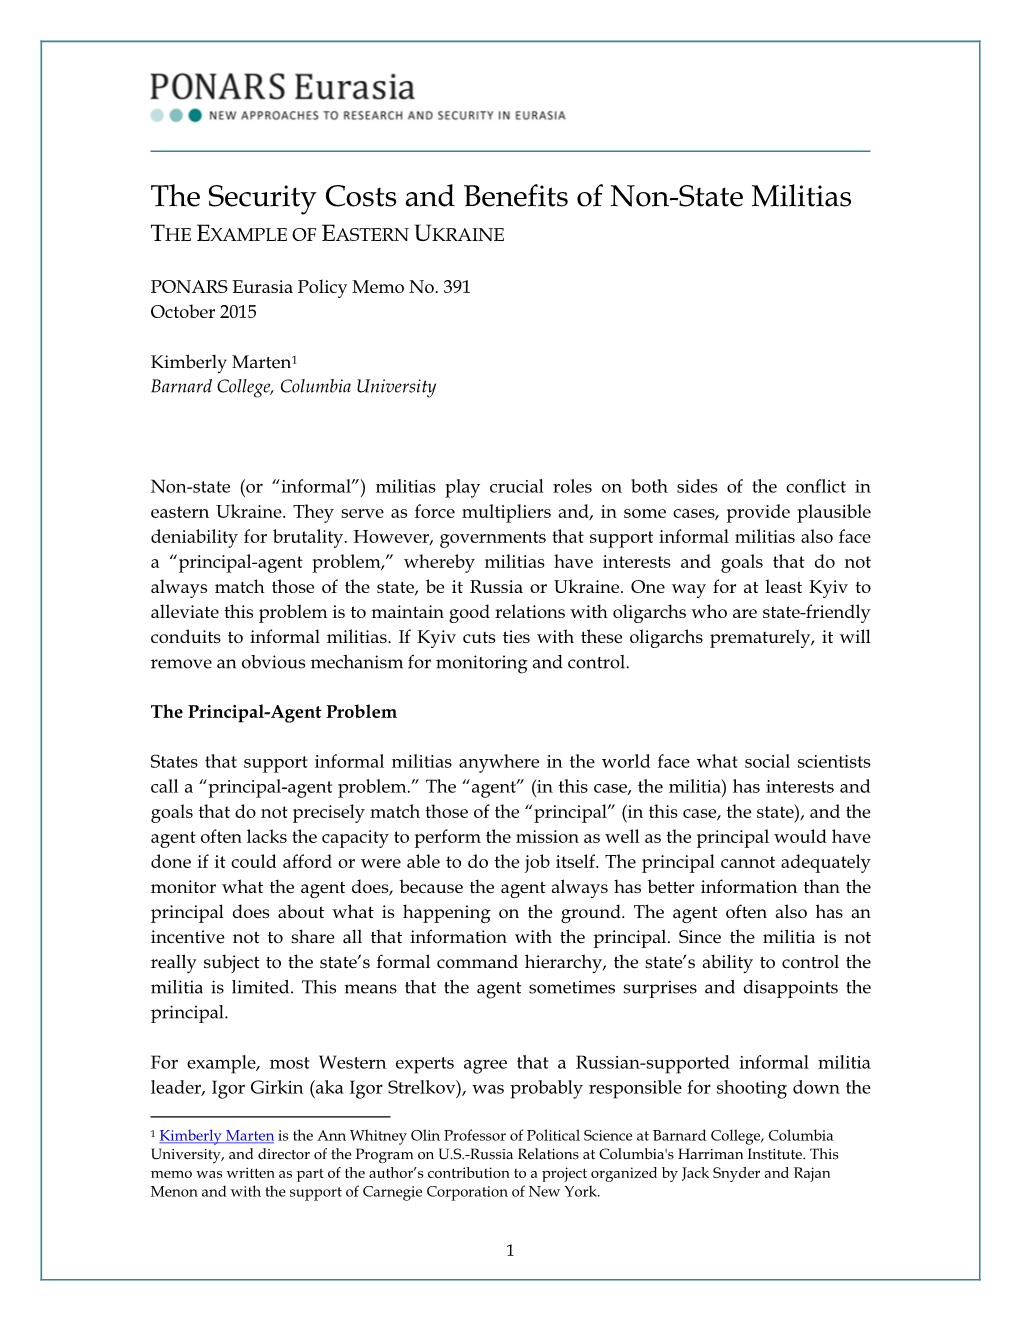 The Security Costs and Benefits of Non-State Militias the EXAMPLE of EASTERN UKRAINE